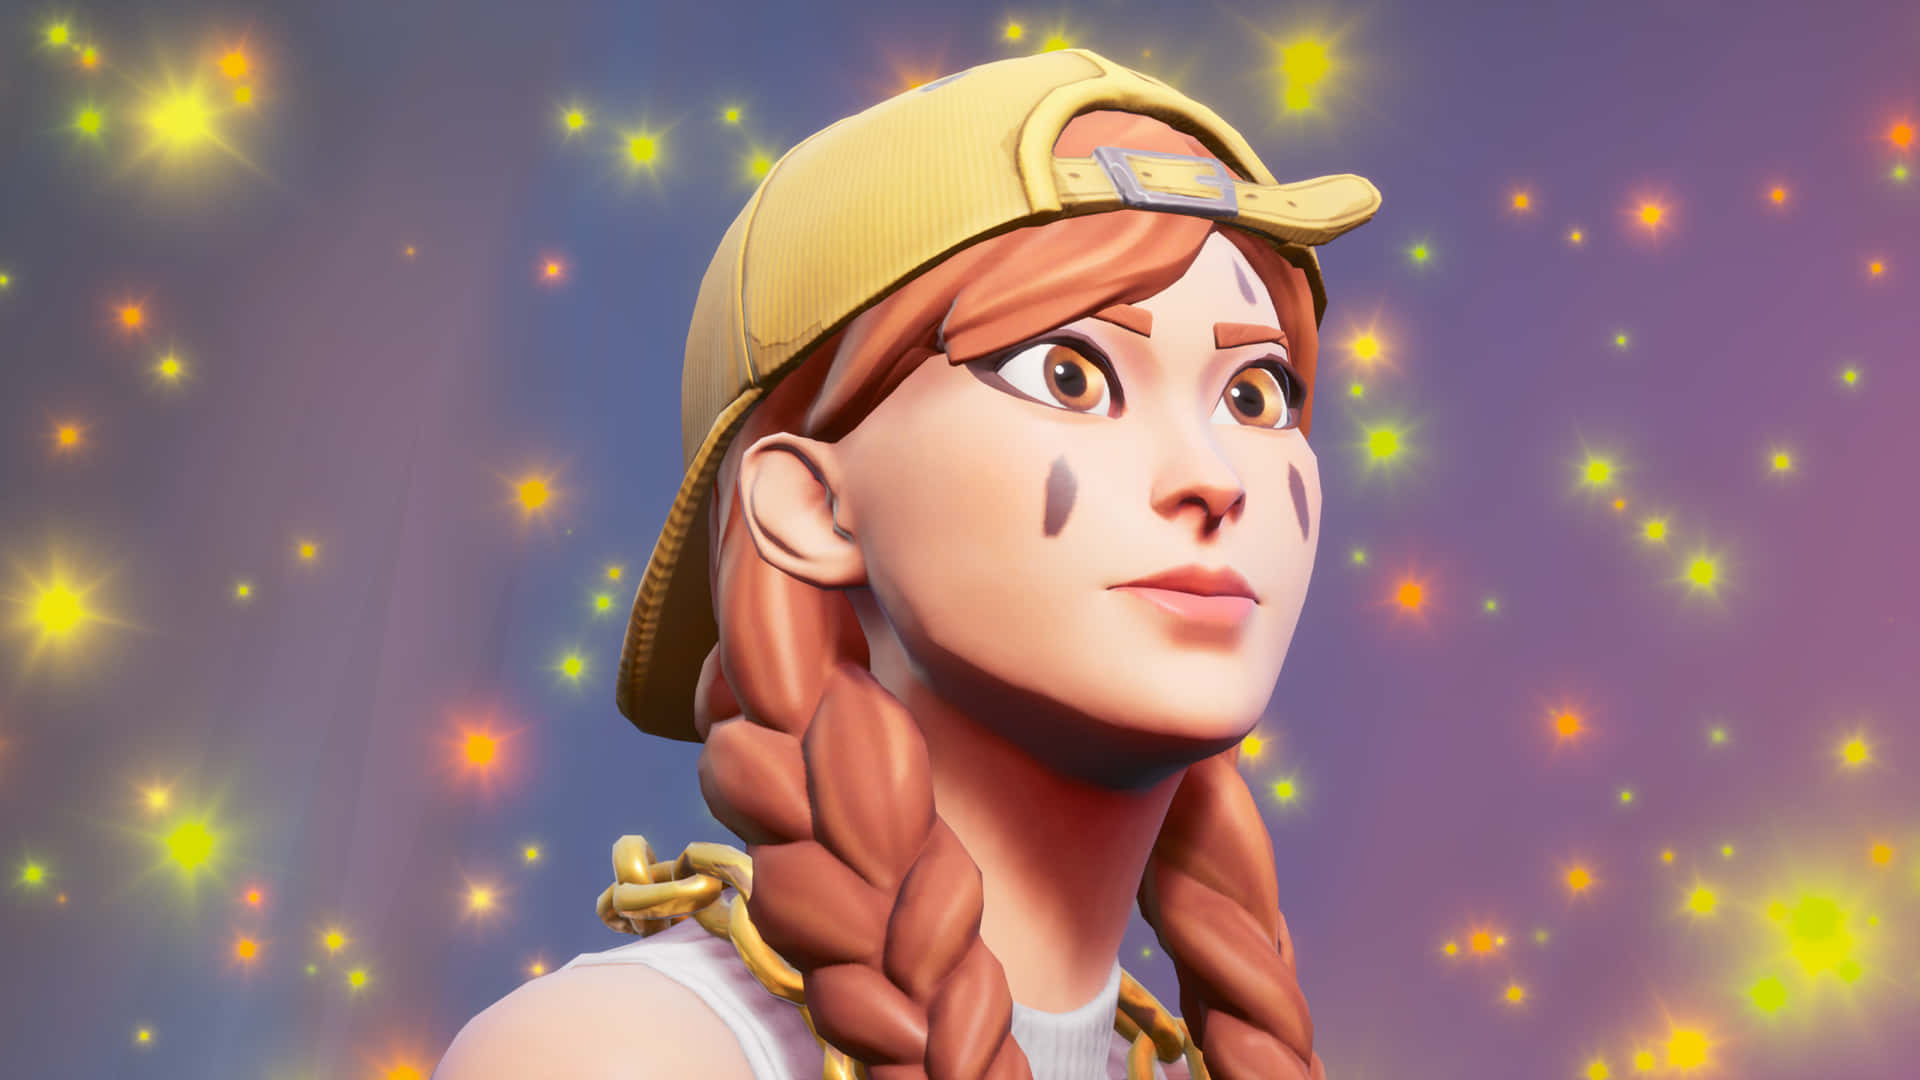 "Introducing Cute Fortnite, the newest addition to the Fortnite craze!" Wallpaper